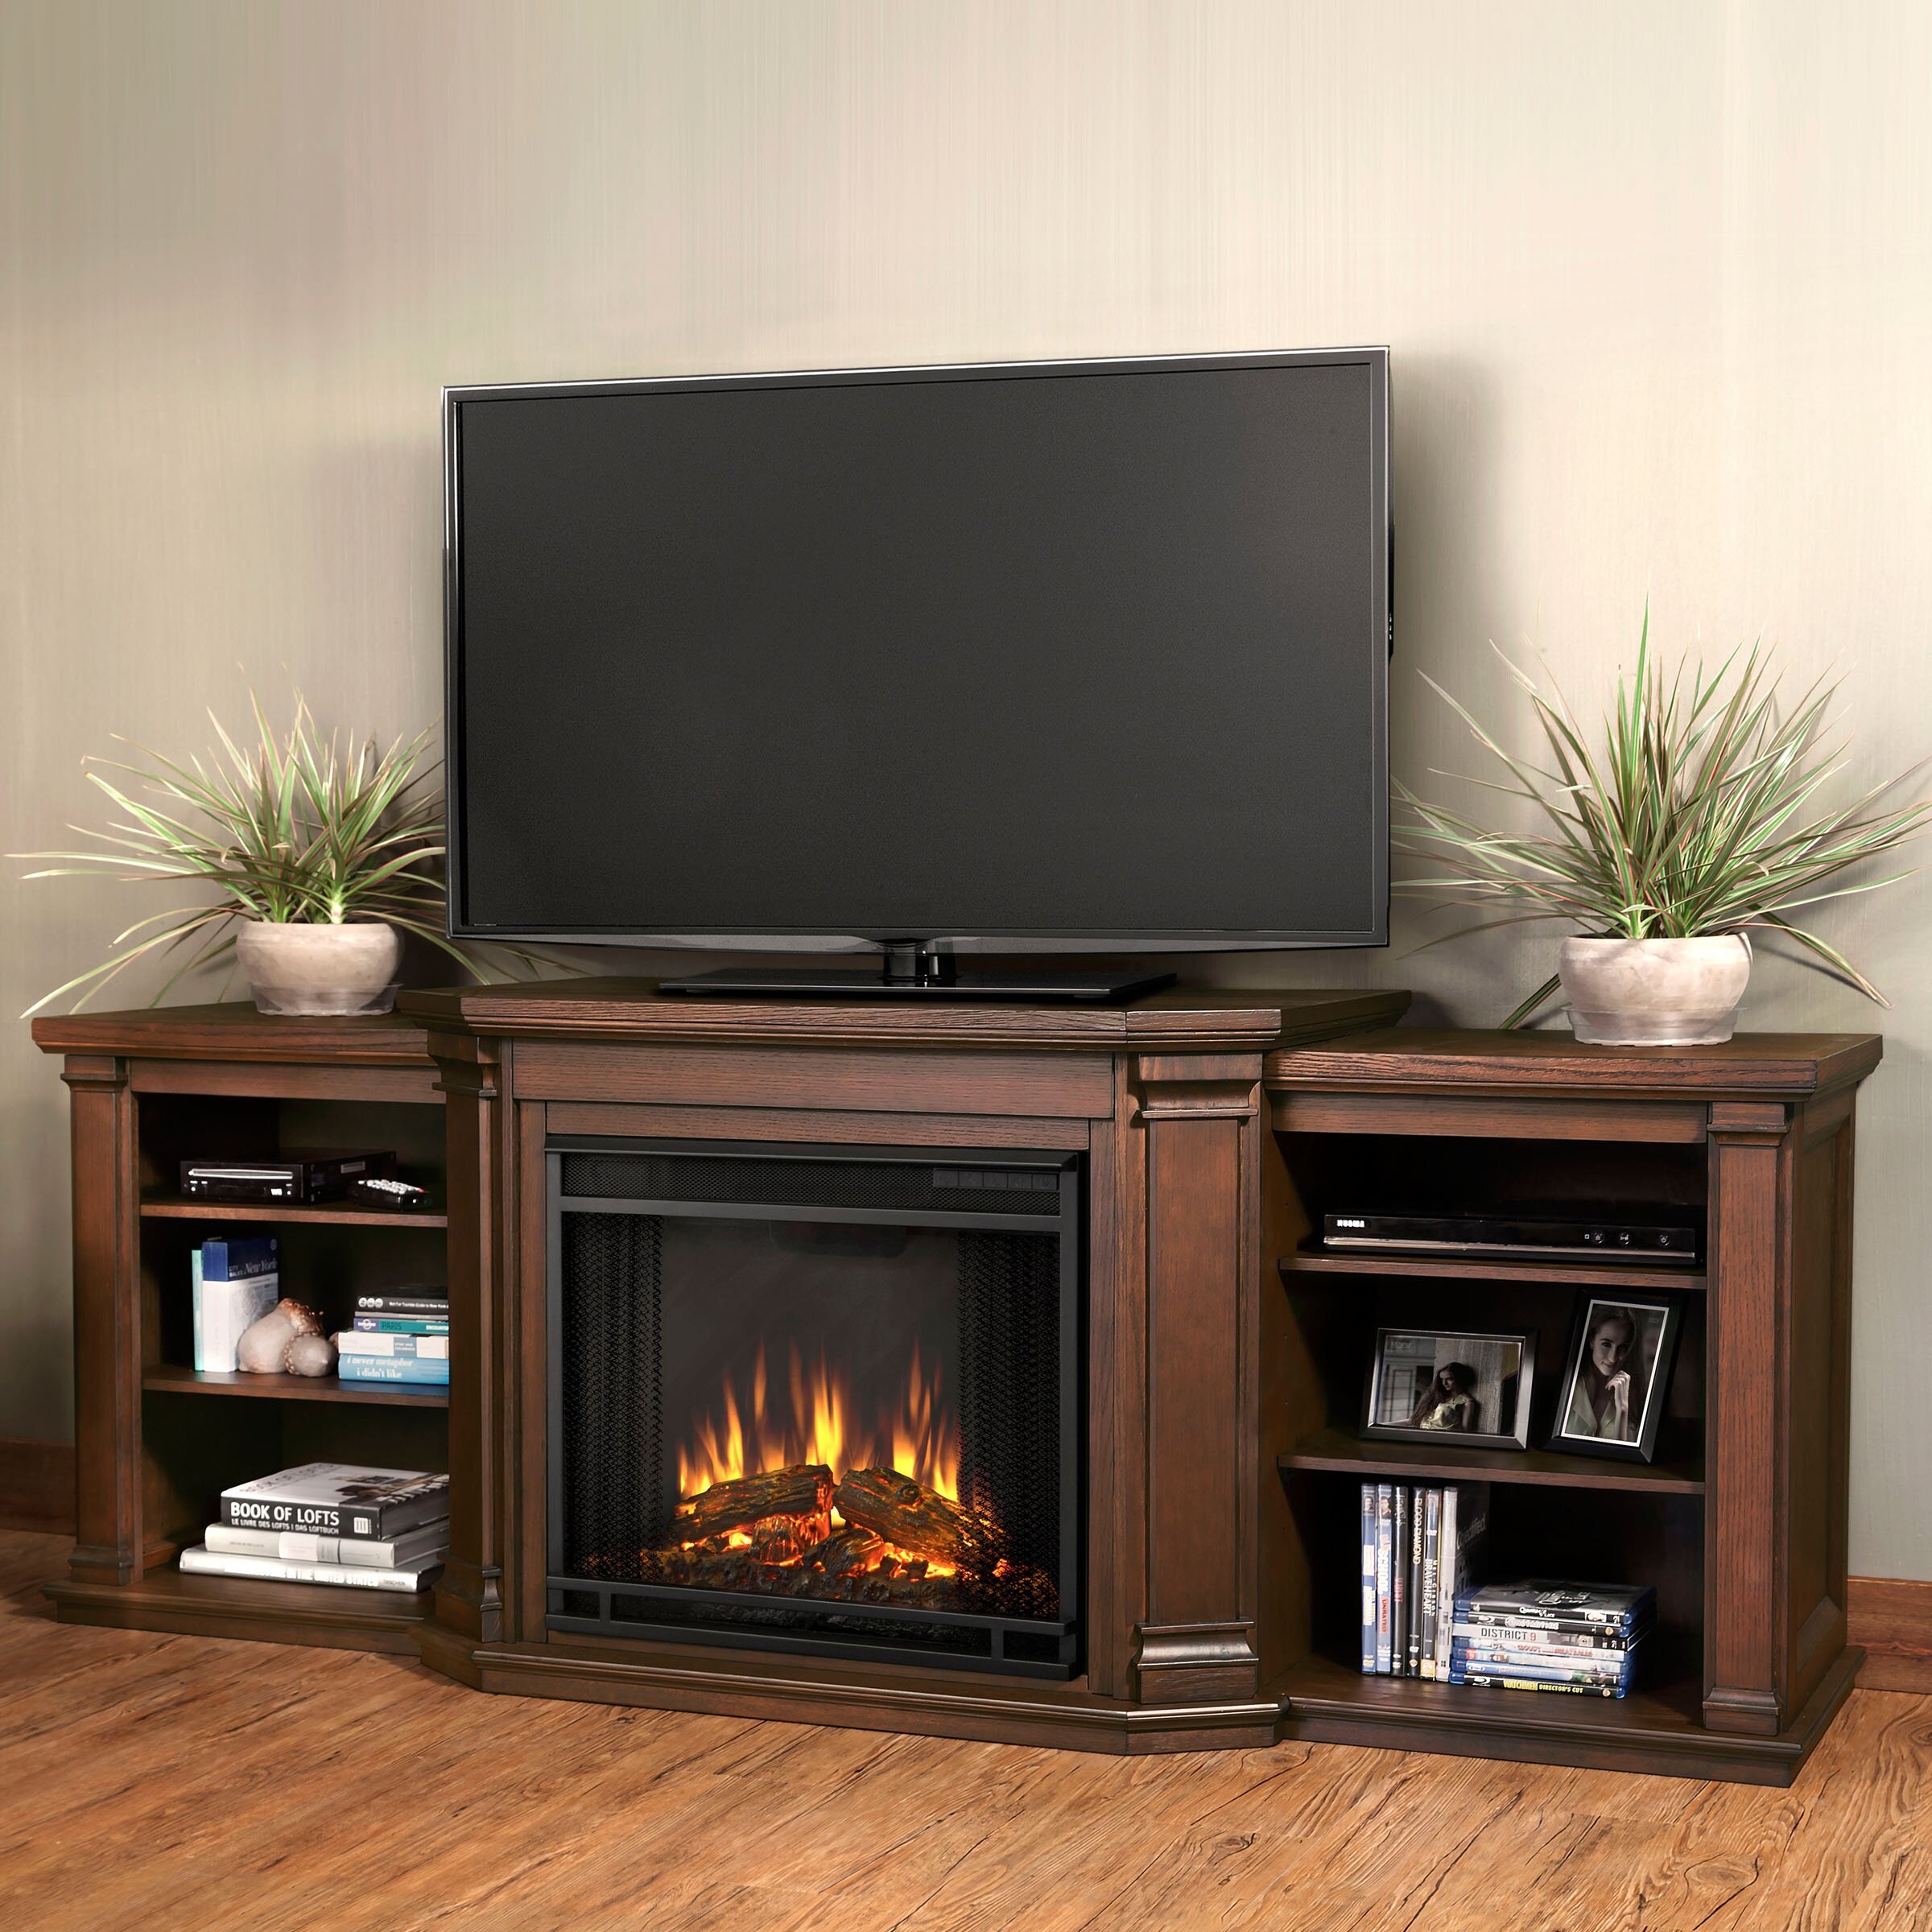 Valmont TV Stand for TVs up to 85 inches with Fireplace Included